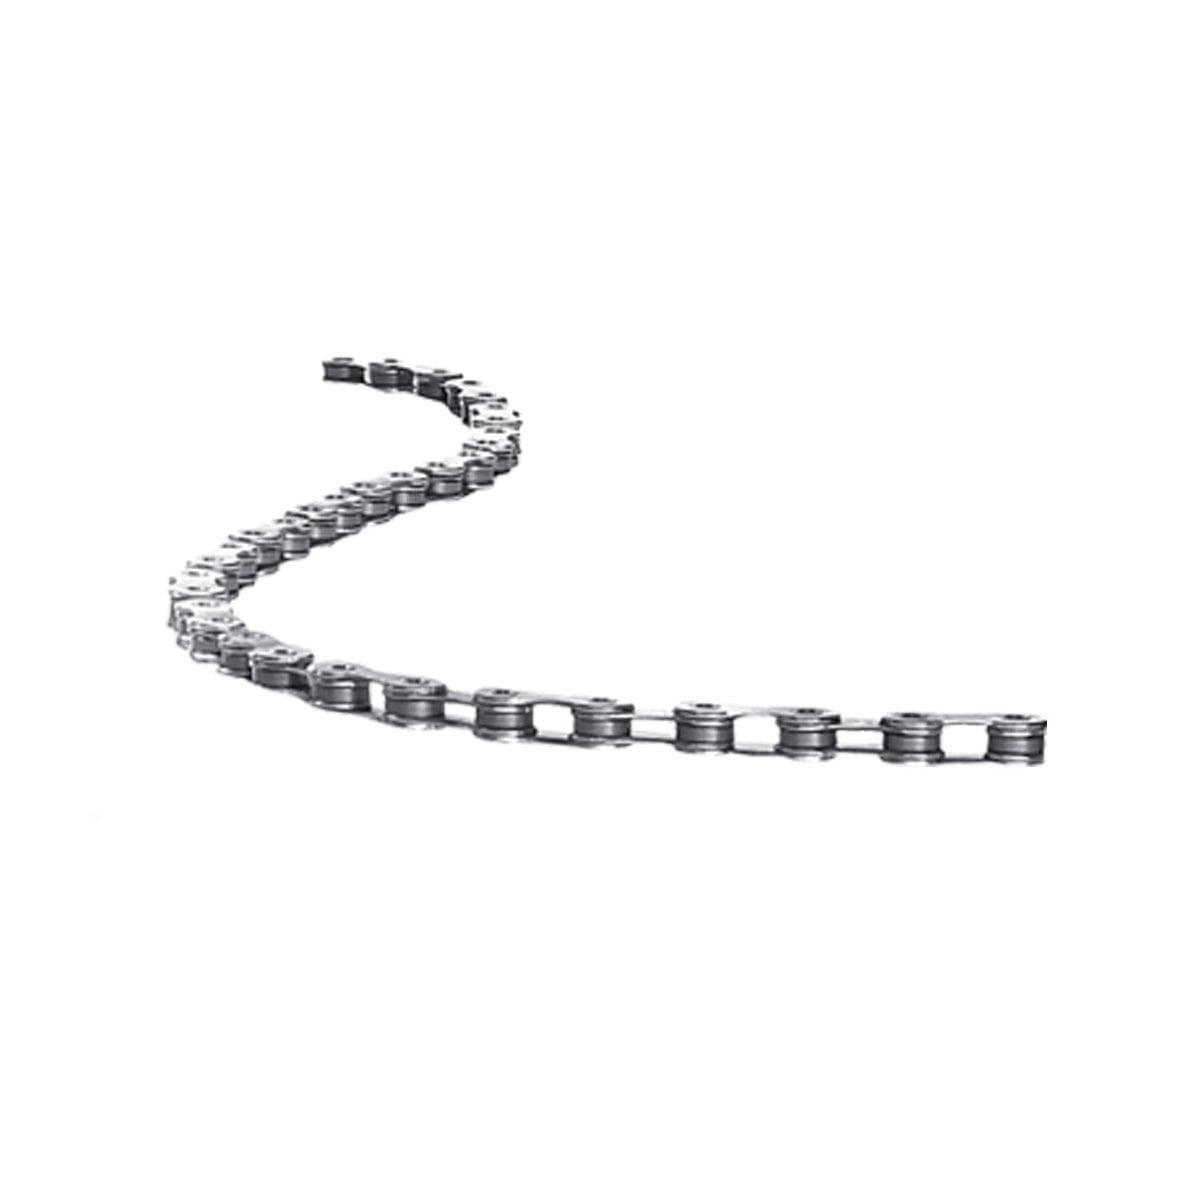 Sram Pc1170 Hollowpin 11 Speed Chain Silver 120 Link With Powerlock:  11 Speed